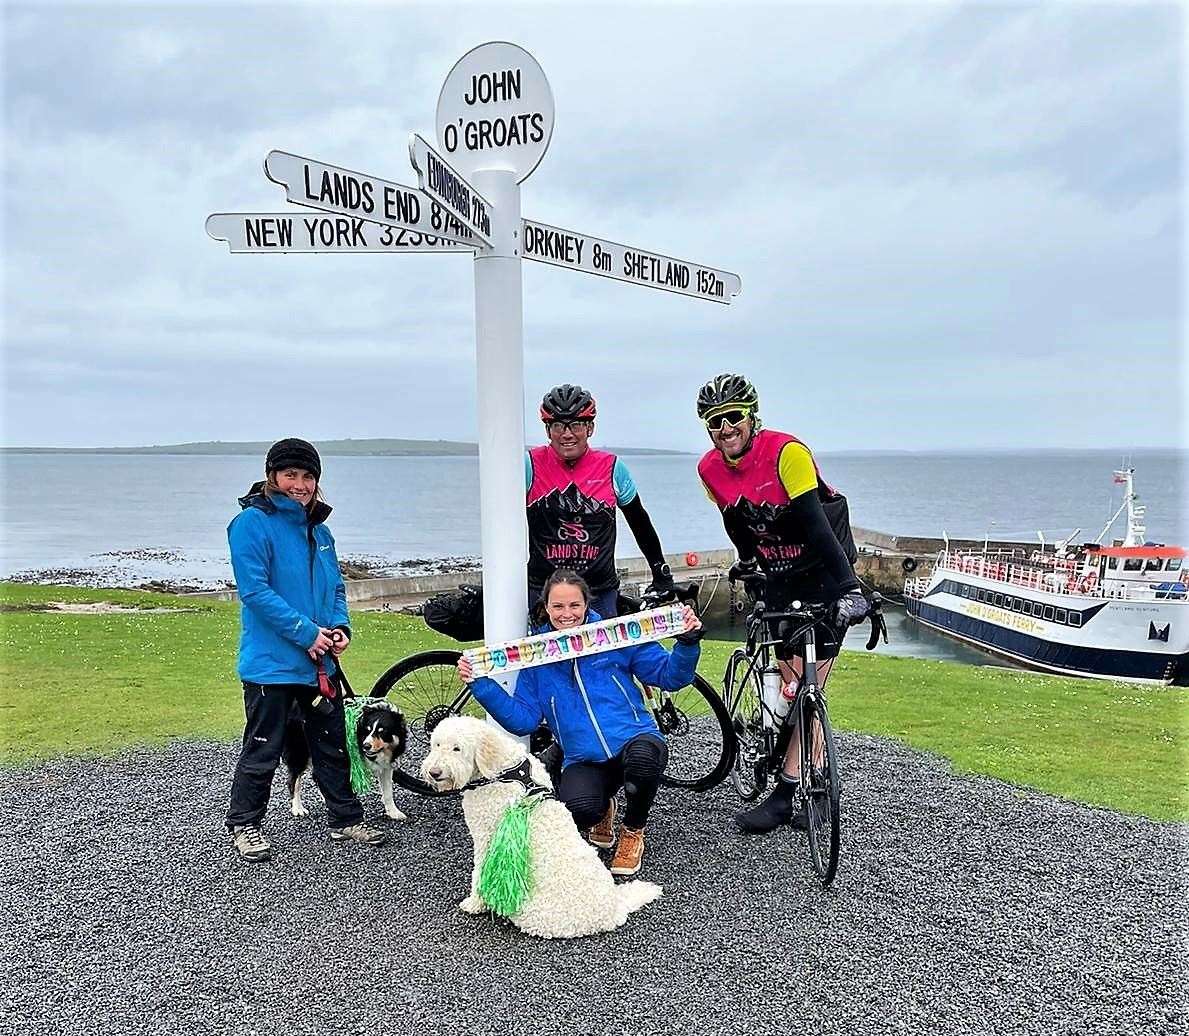 End of the road celebrations for the cycling pair. Pictured with Edward and Phill are their wives Emma Jenner and Clare Ryan, holding banner, along with dogs Luna and Cassie.